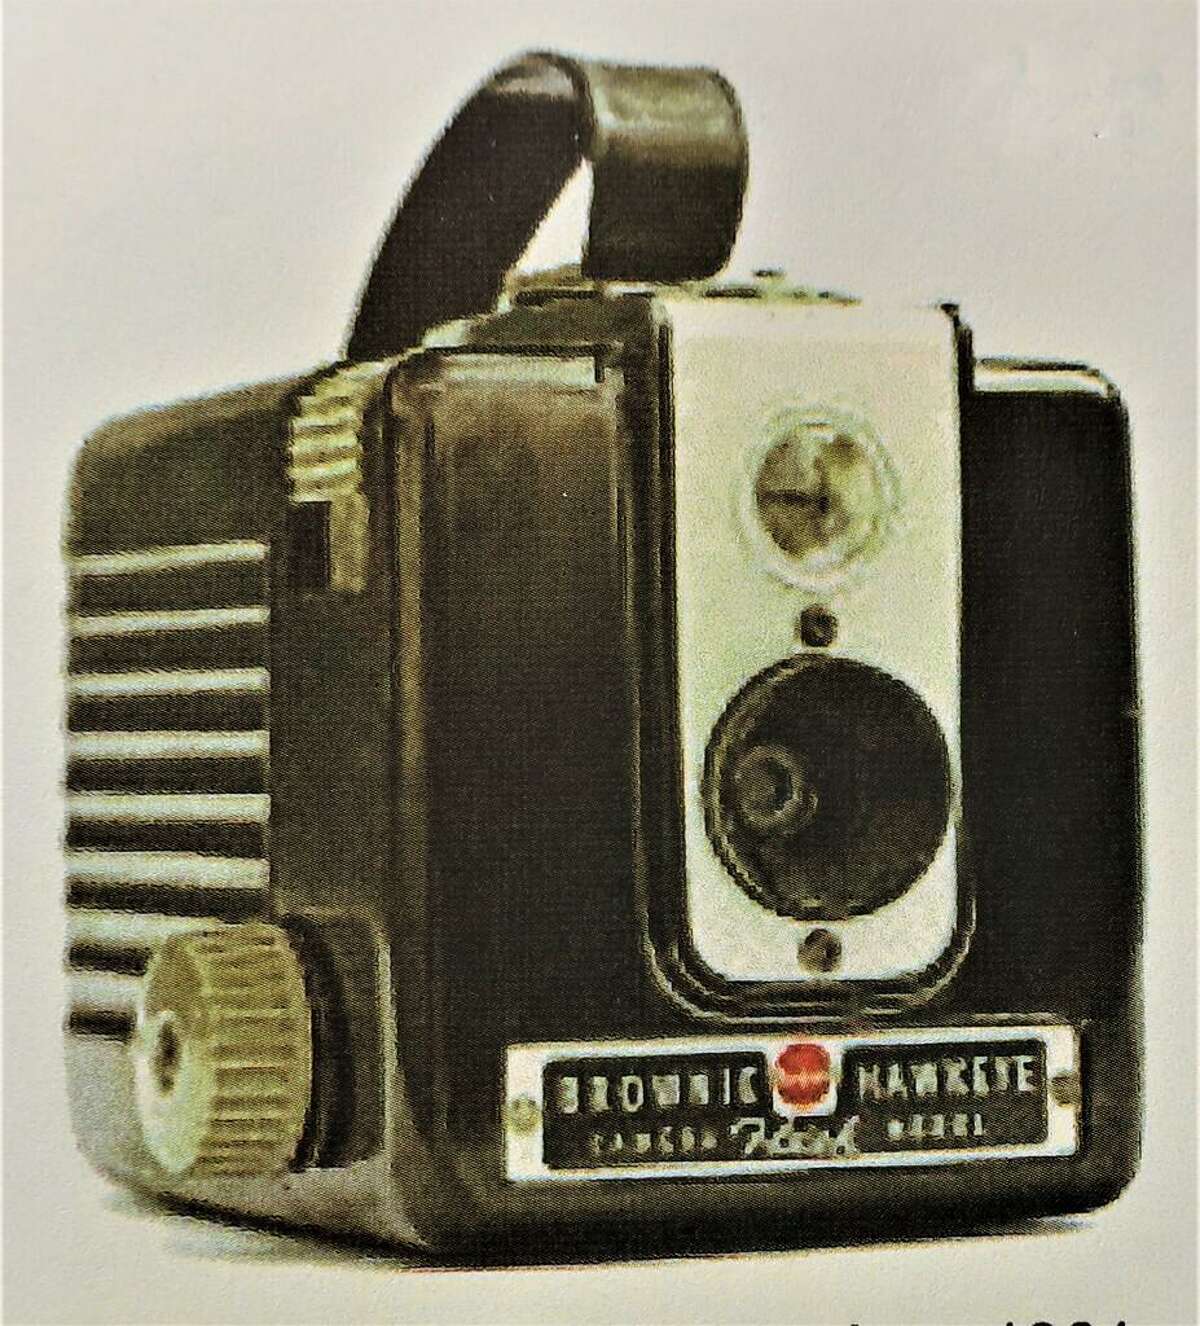 Middletown veteran and first-time author Gerald E. Augustine used this 1949 Kodak Brownie Hawkeye box camera to capture photos while serving in Vietnam.